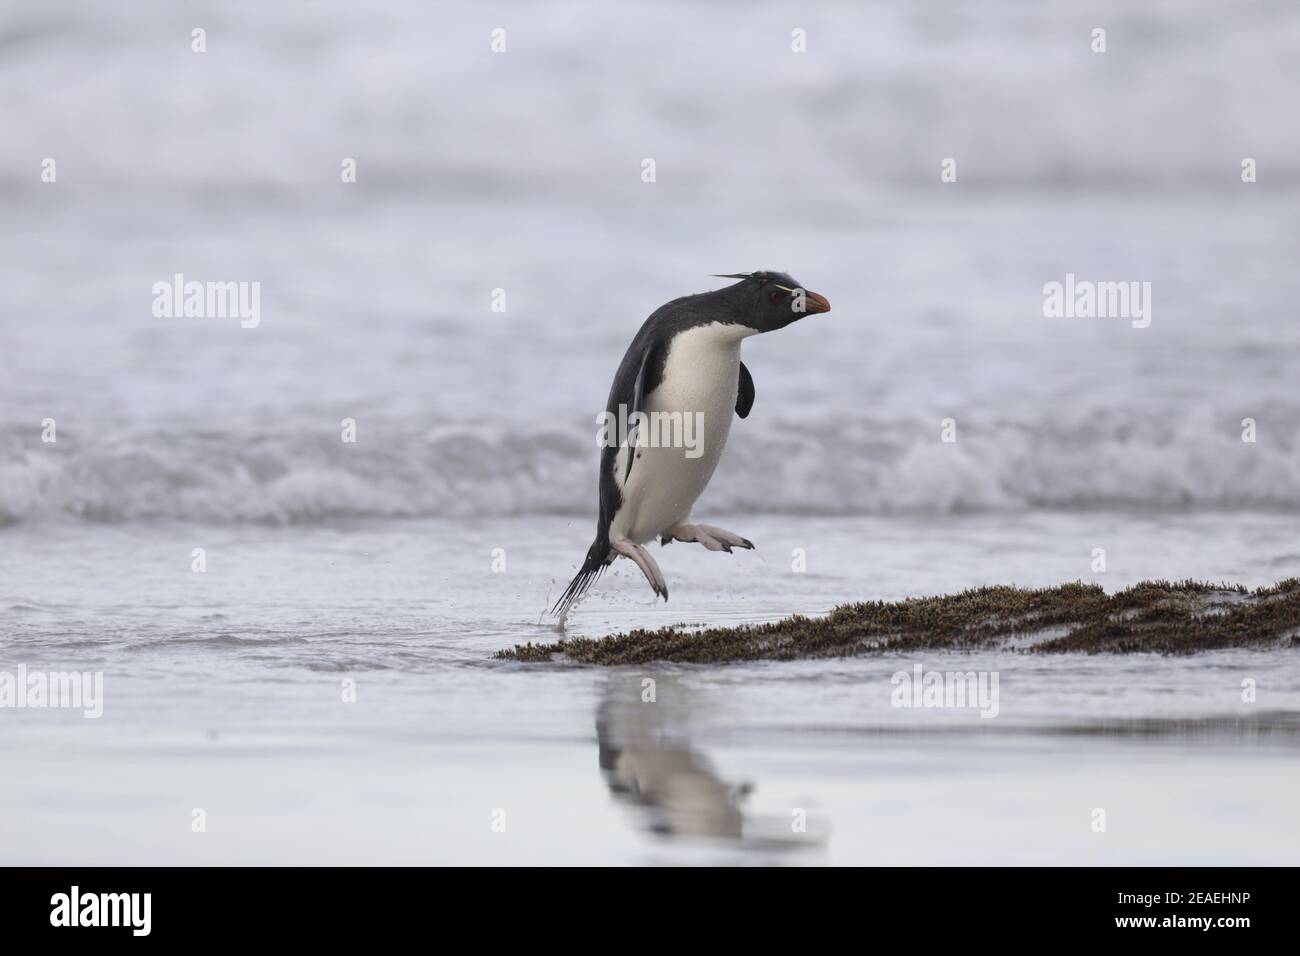 Southern Rockhopper Penguin, Eudyptes chrysocome, emerging from the sea Stock Photo